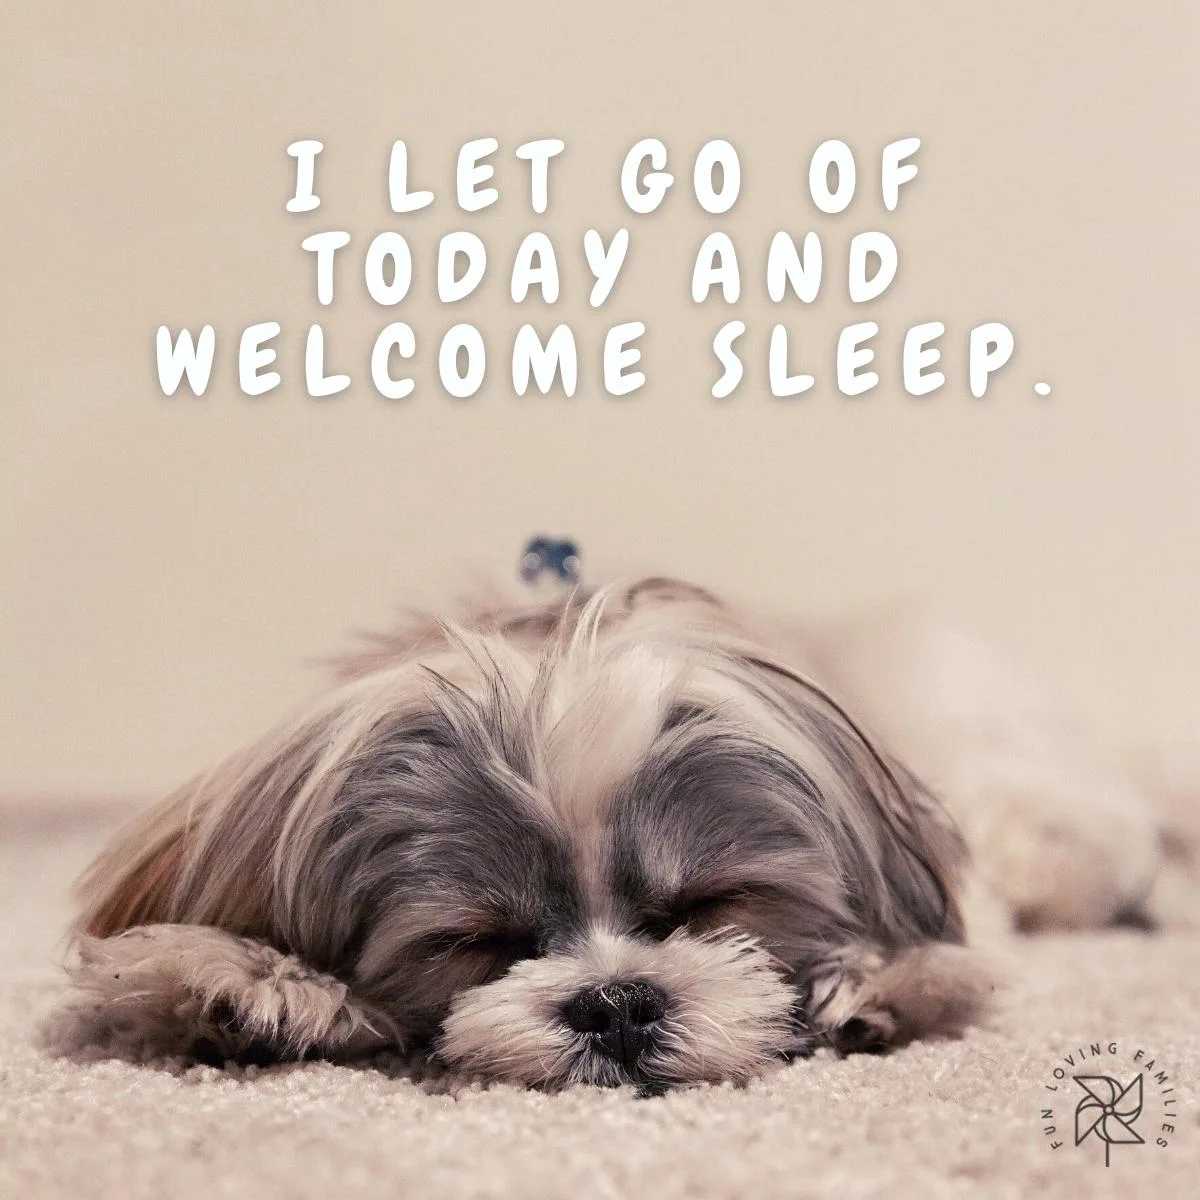 I let go of today and welcome sleep affirmation